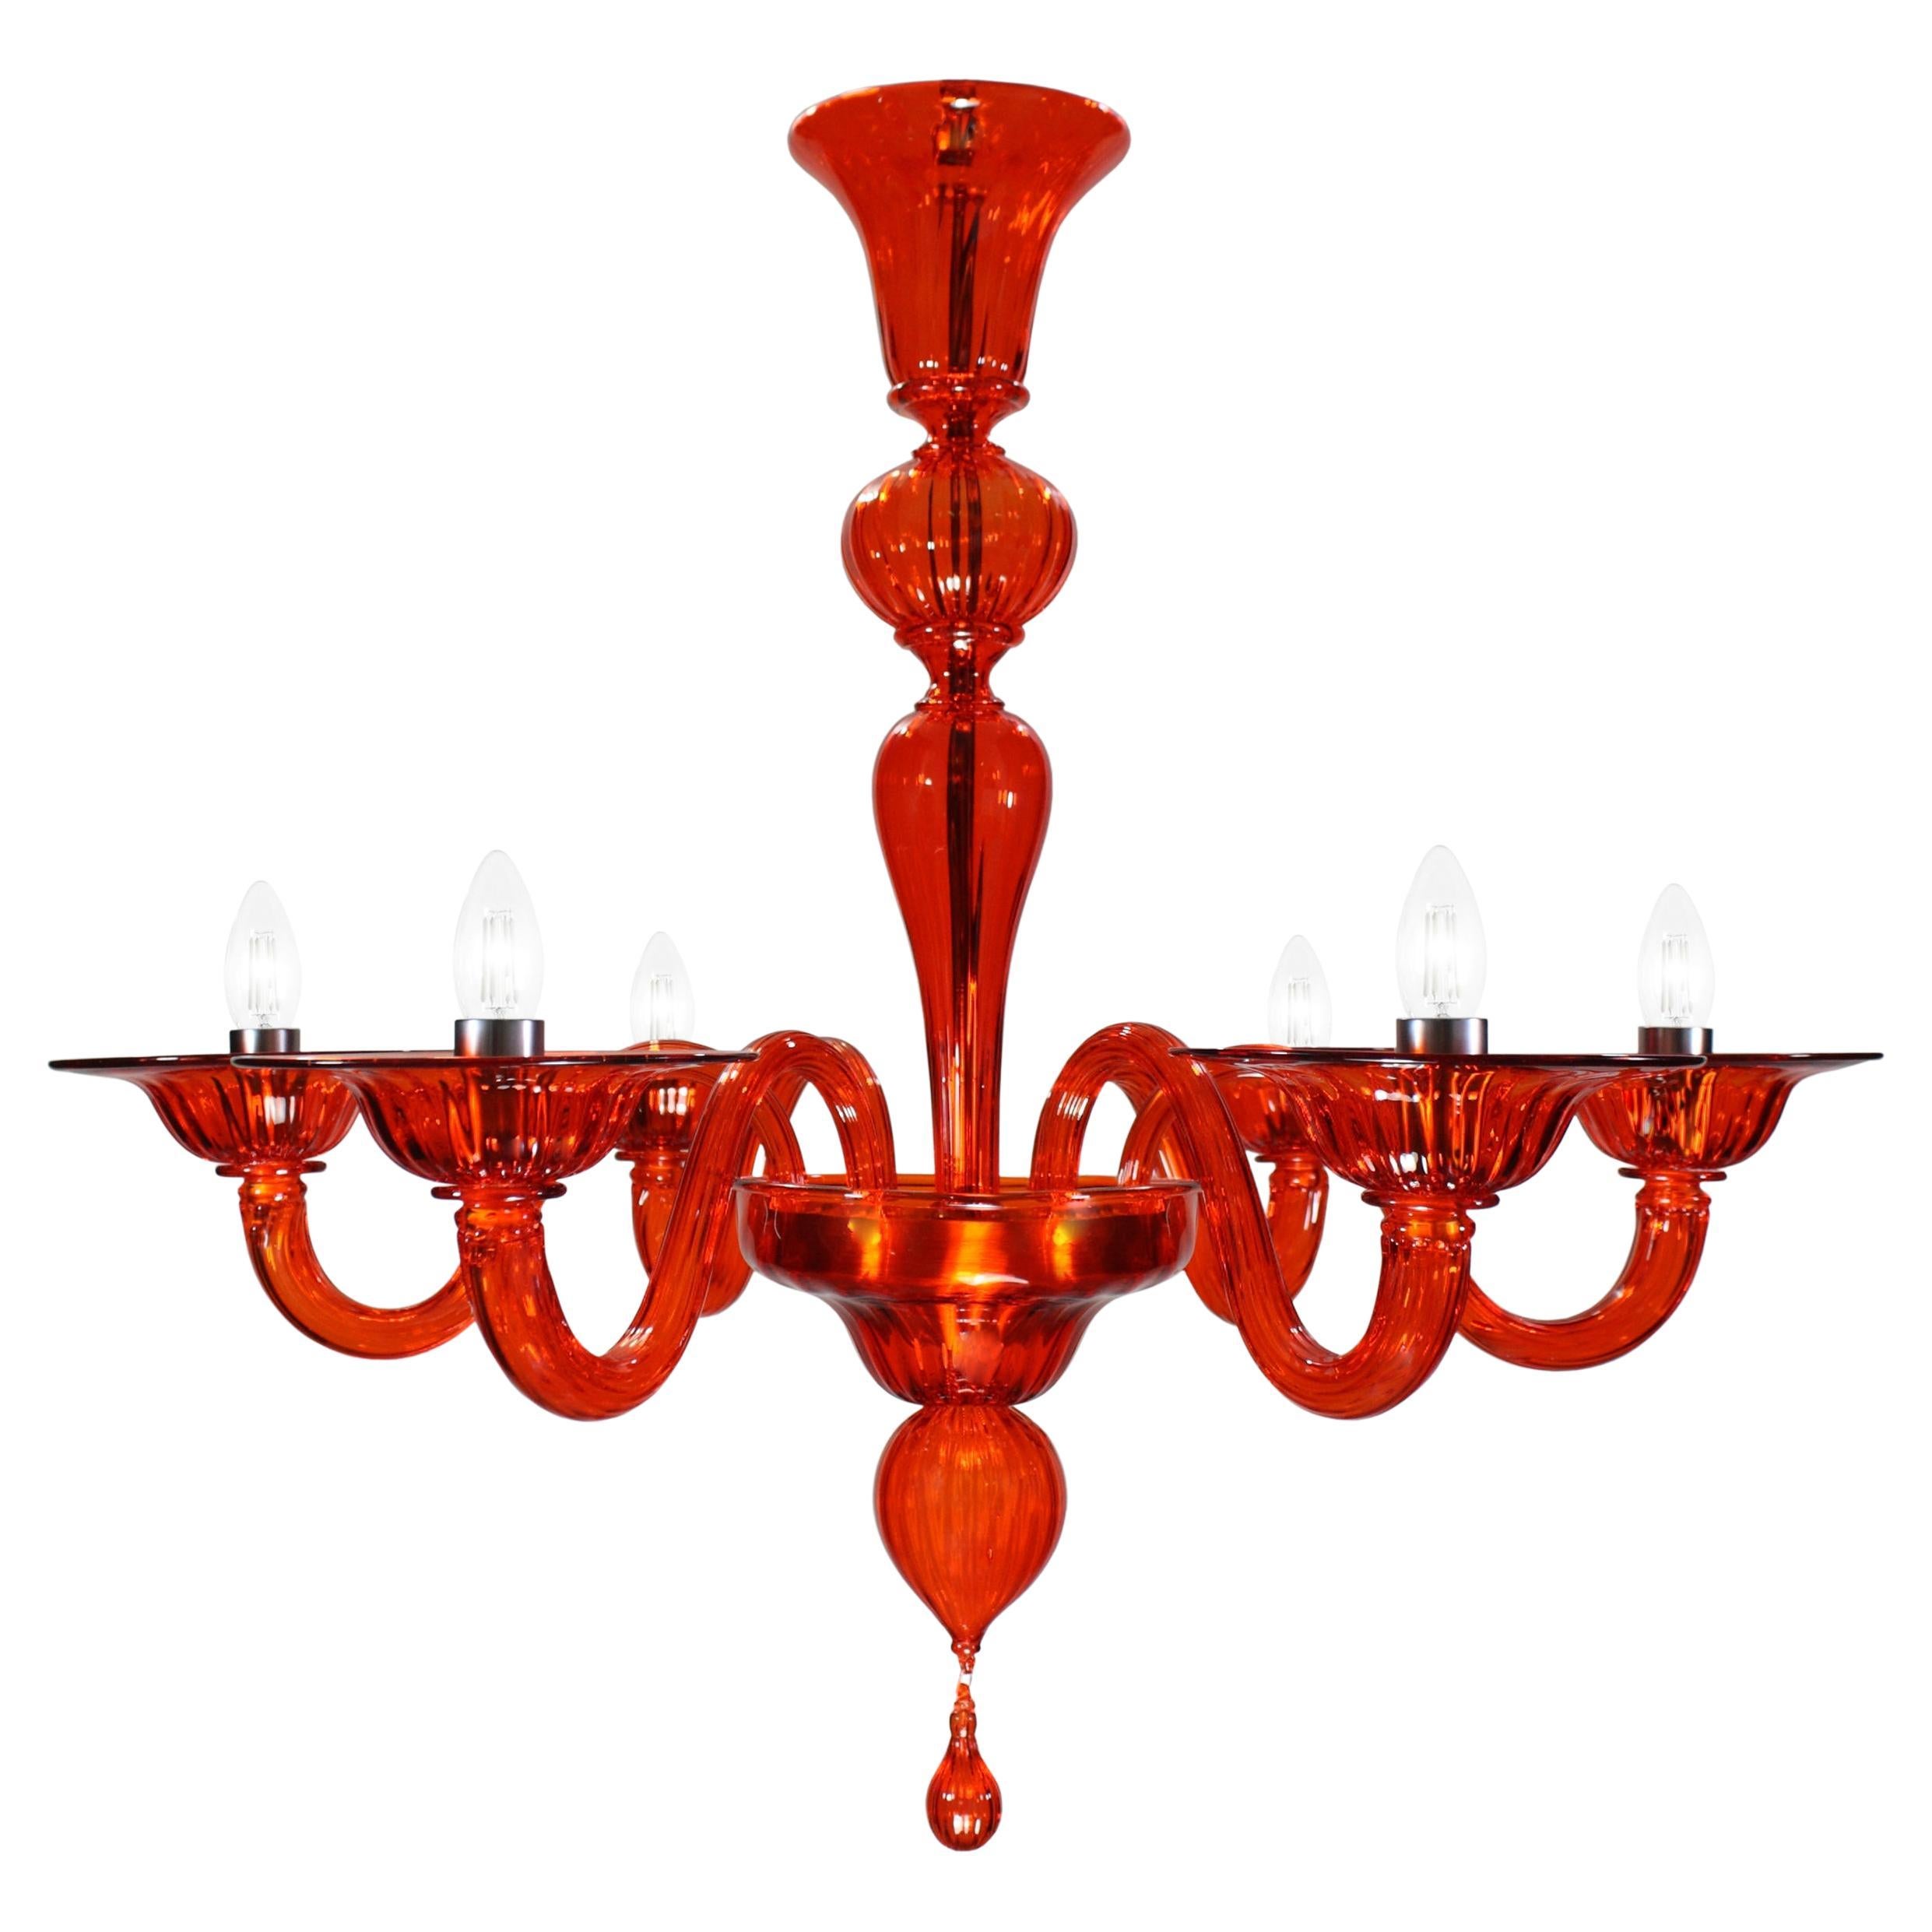 21st Century Chandelier, 6 Arms Orange Murano Glass by Multiforme